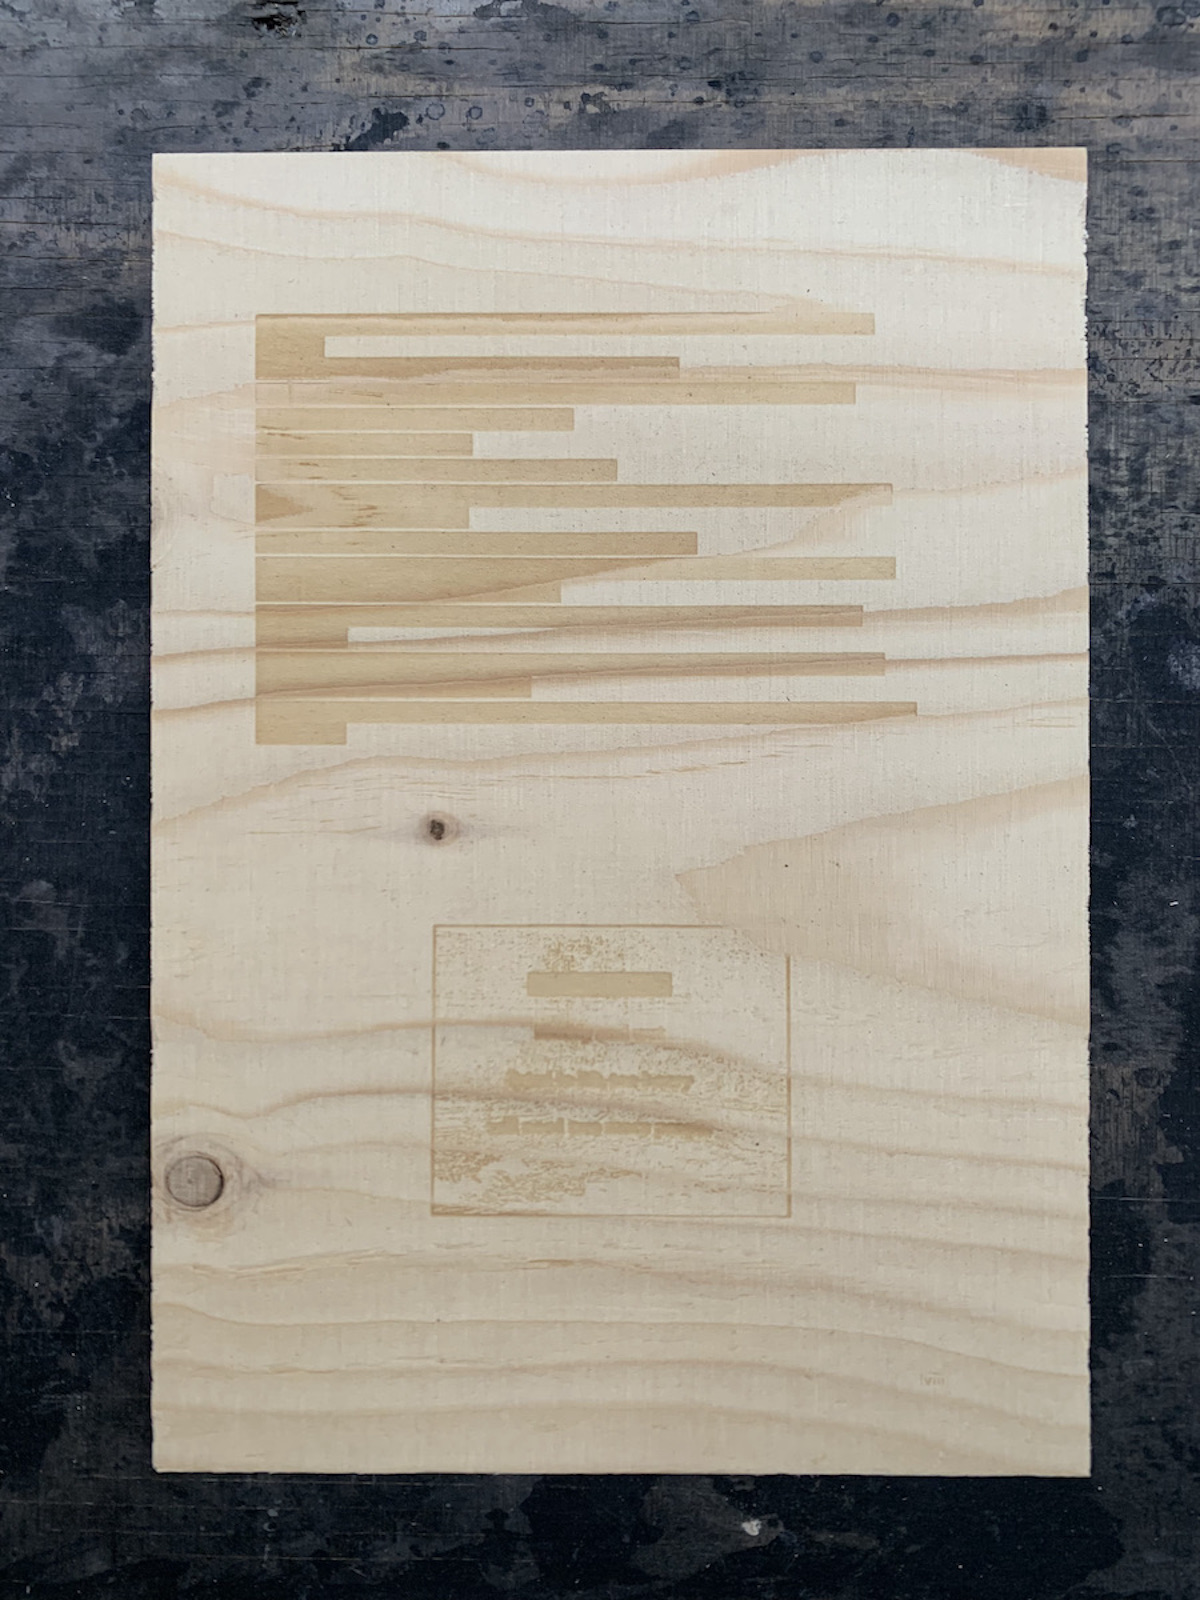 A page of text laser-etched on plywood.